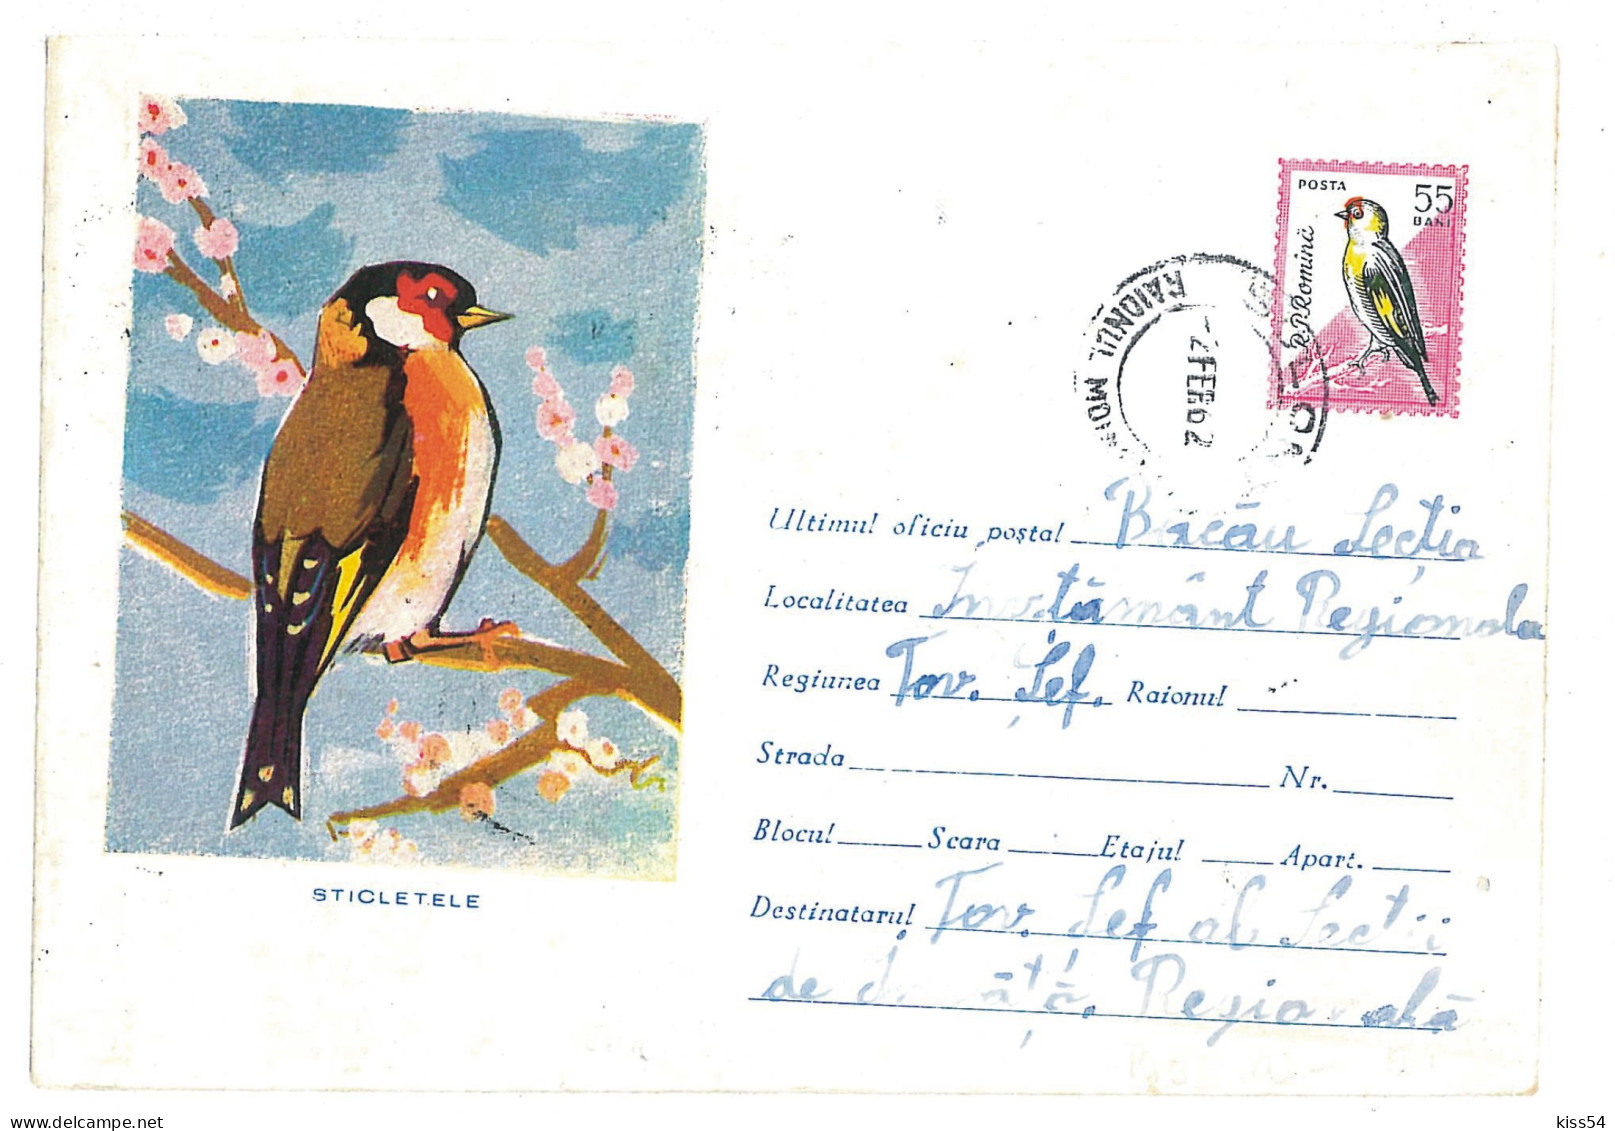 IP 61 - 0411zc Bird, GOLDFINCH, Romania - Stationery ( Little Fixed Stamp ) - Used - 1961 - Enteros Postales